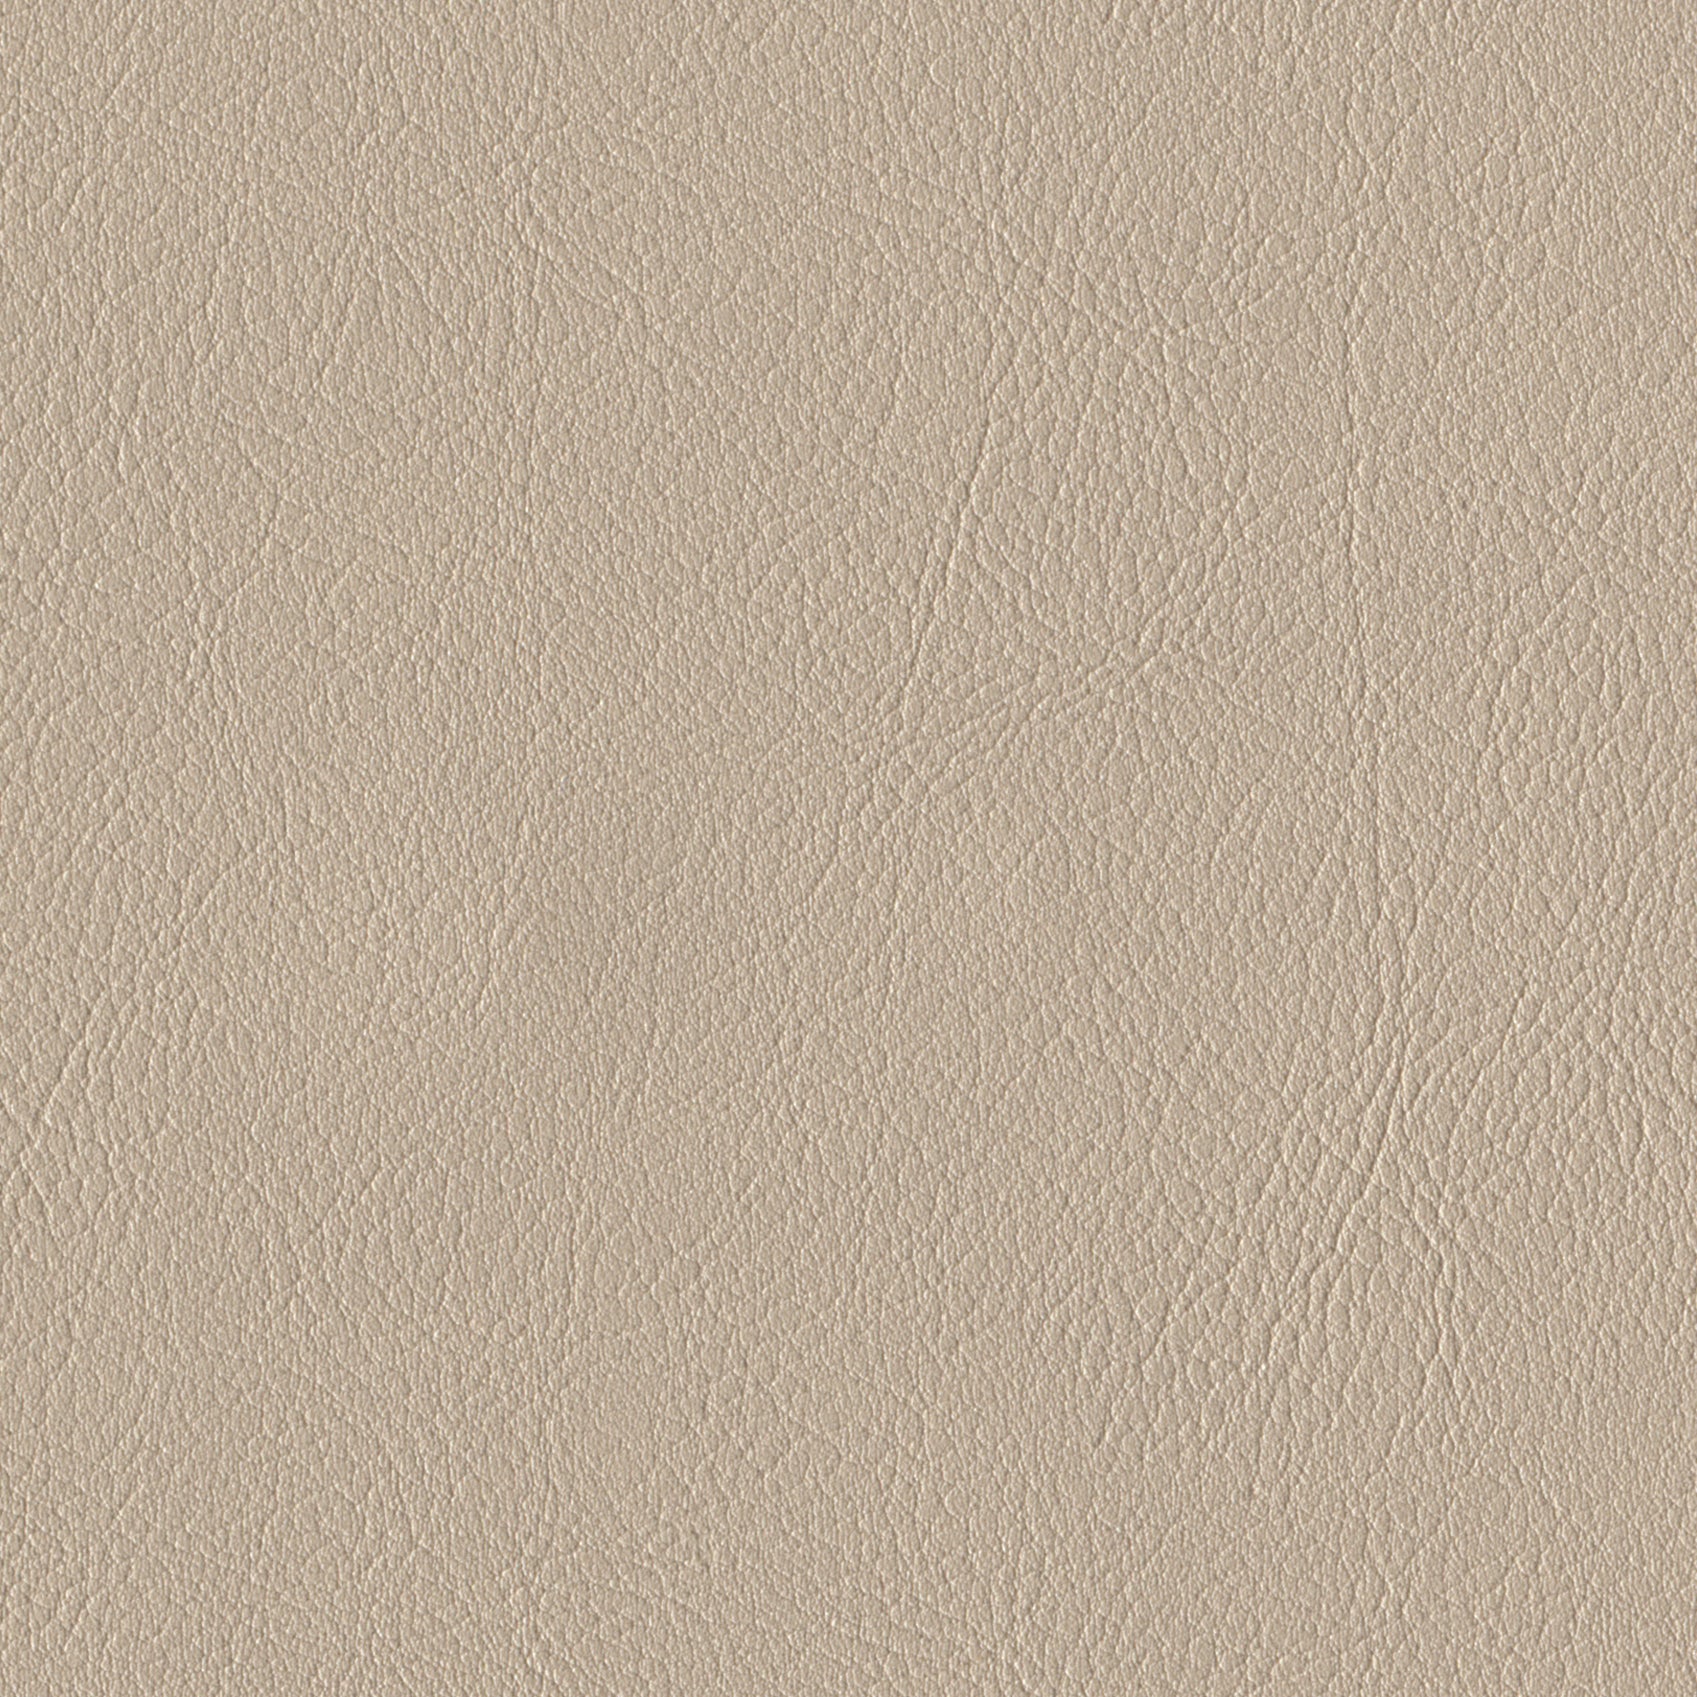    Andriali-Contract-Vinyl_Upholstery-Design-LegacyFR-Color-022Sand-Width-140cm